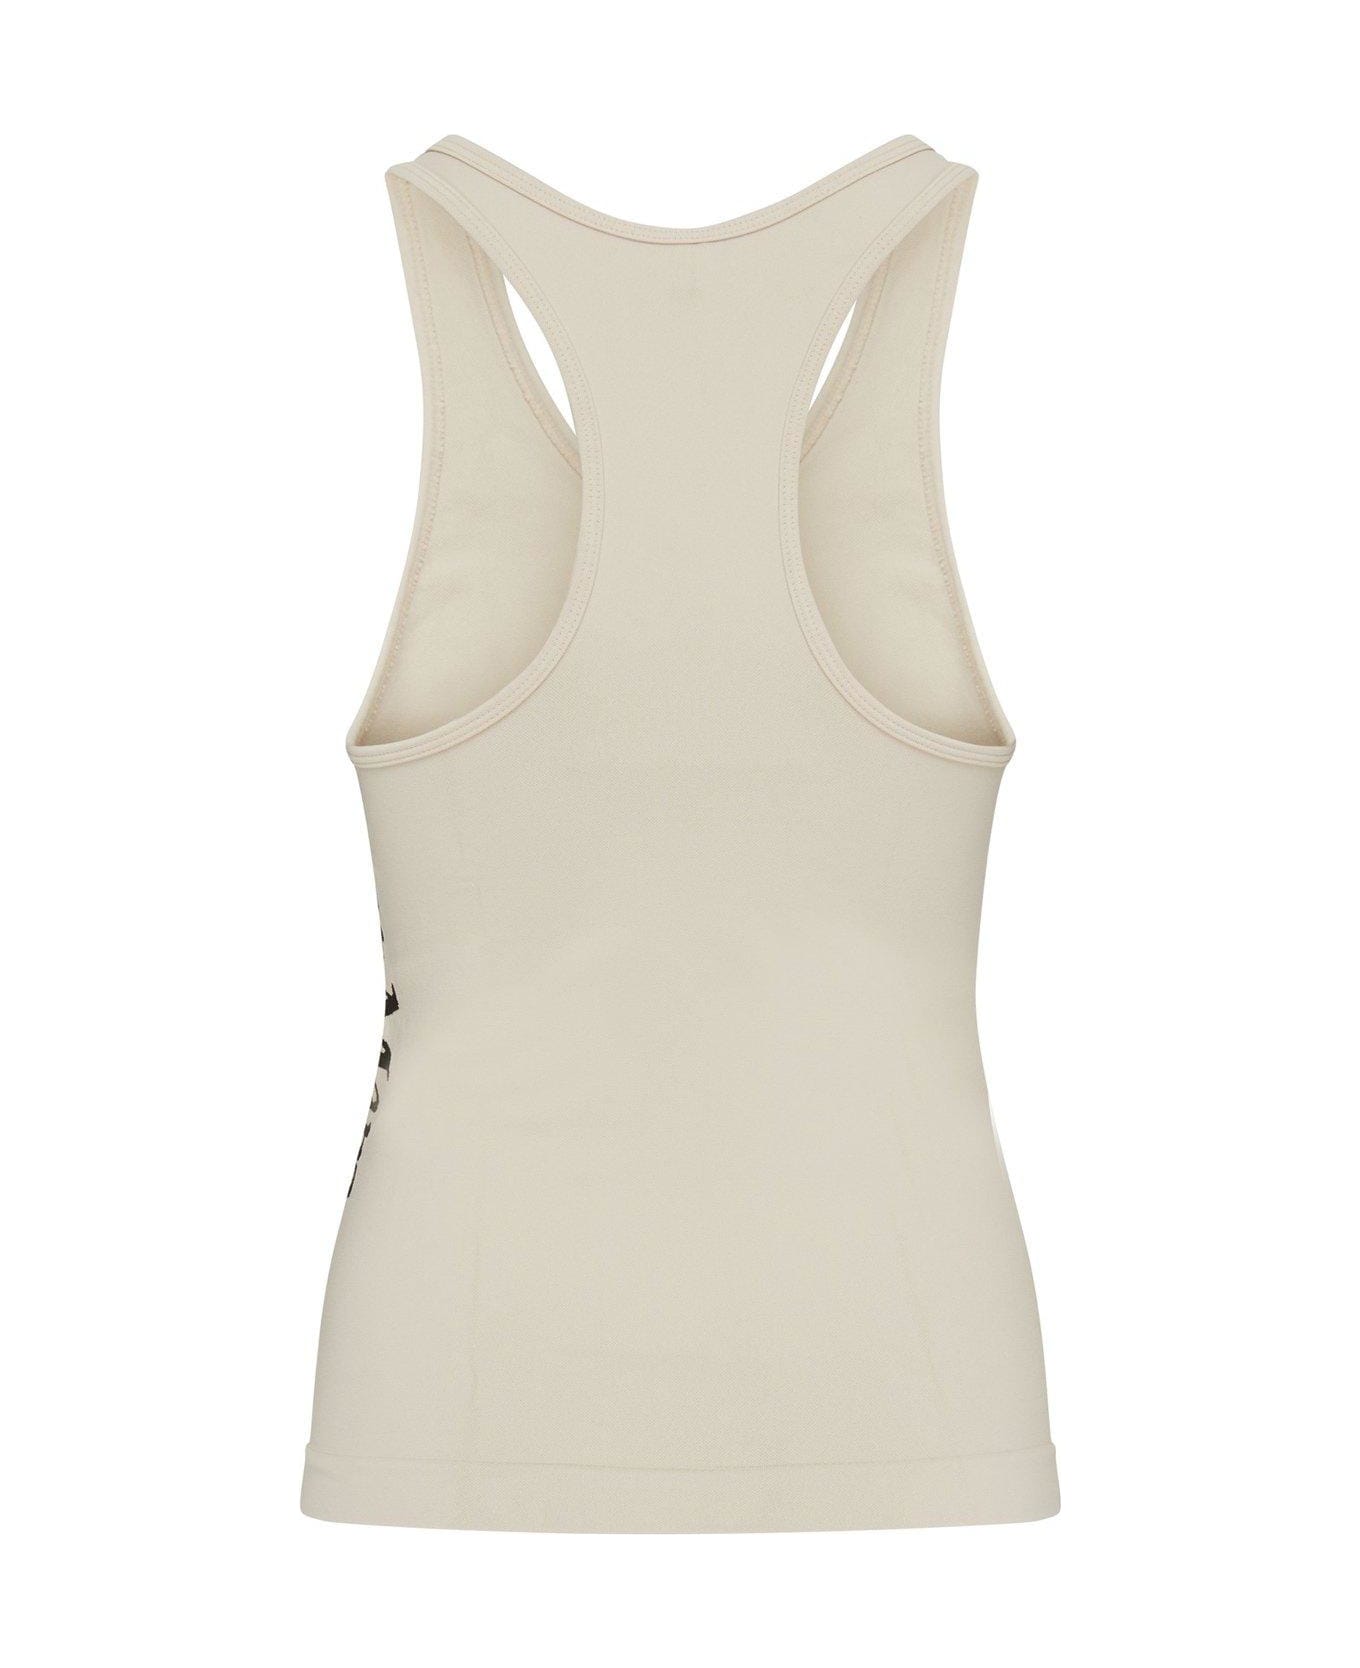 'S Max Mara Logo Detailed Stretched Tank Top - NEUTRALS タンクトップ